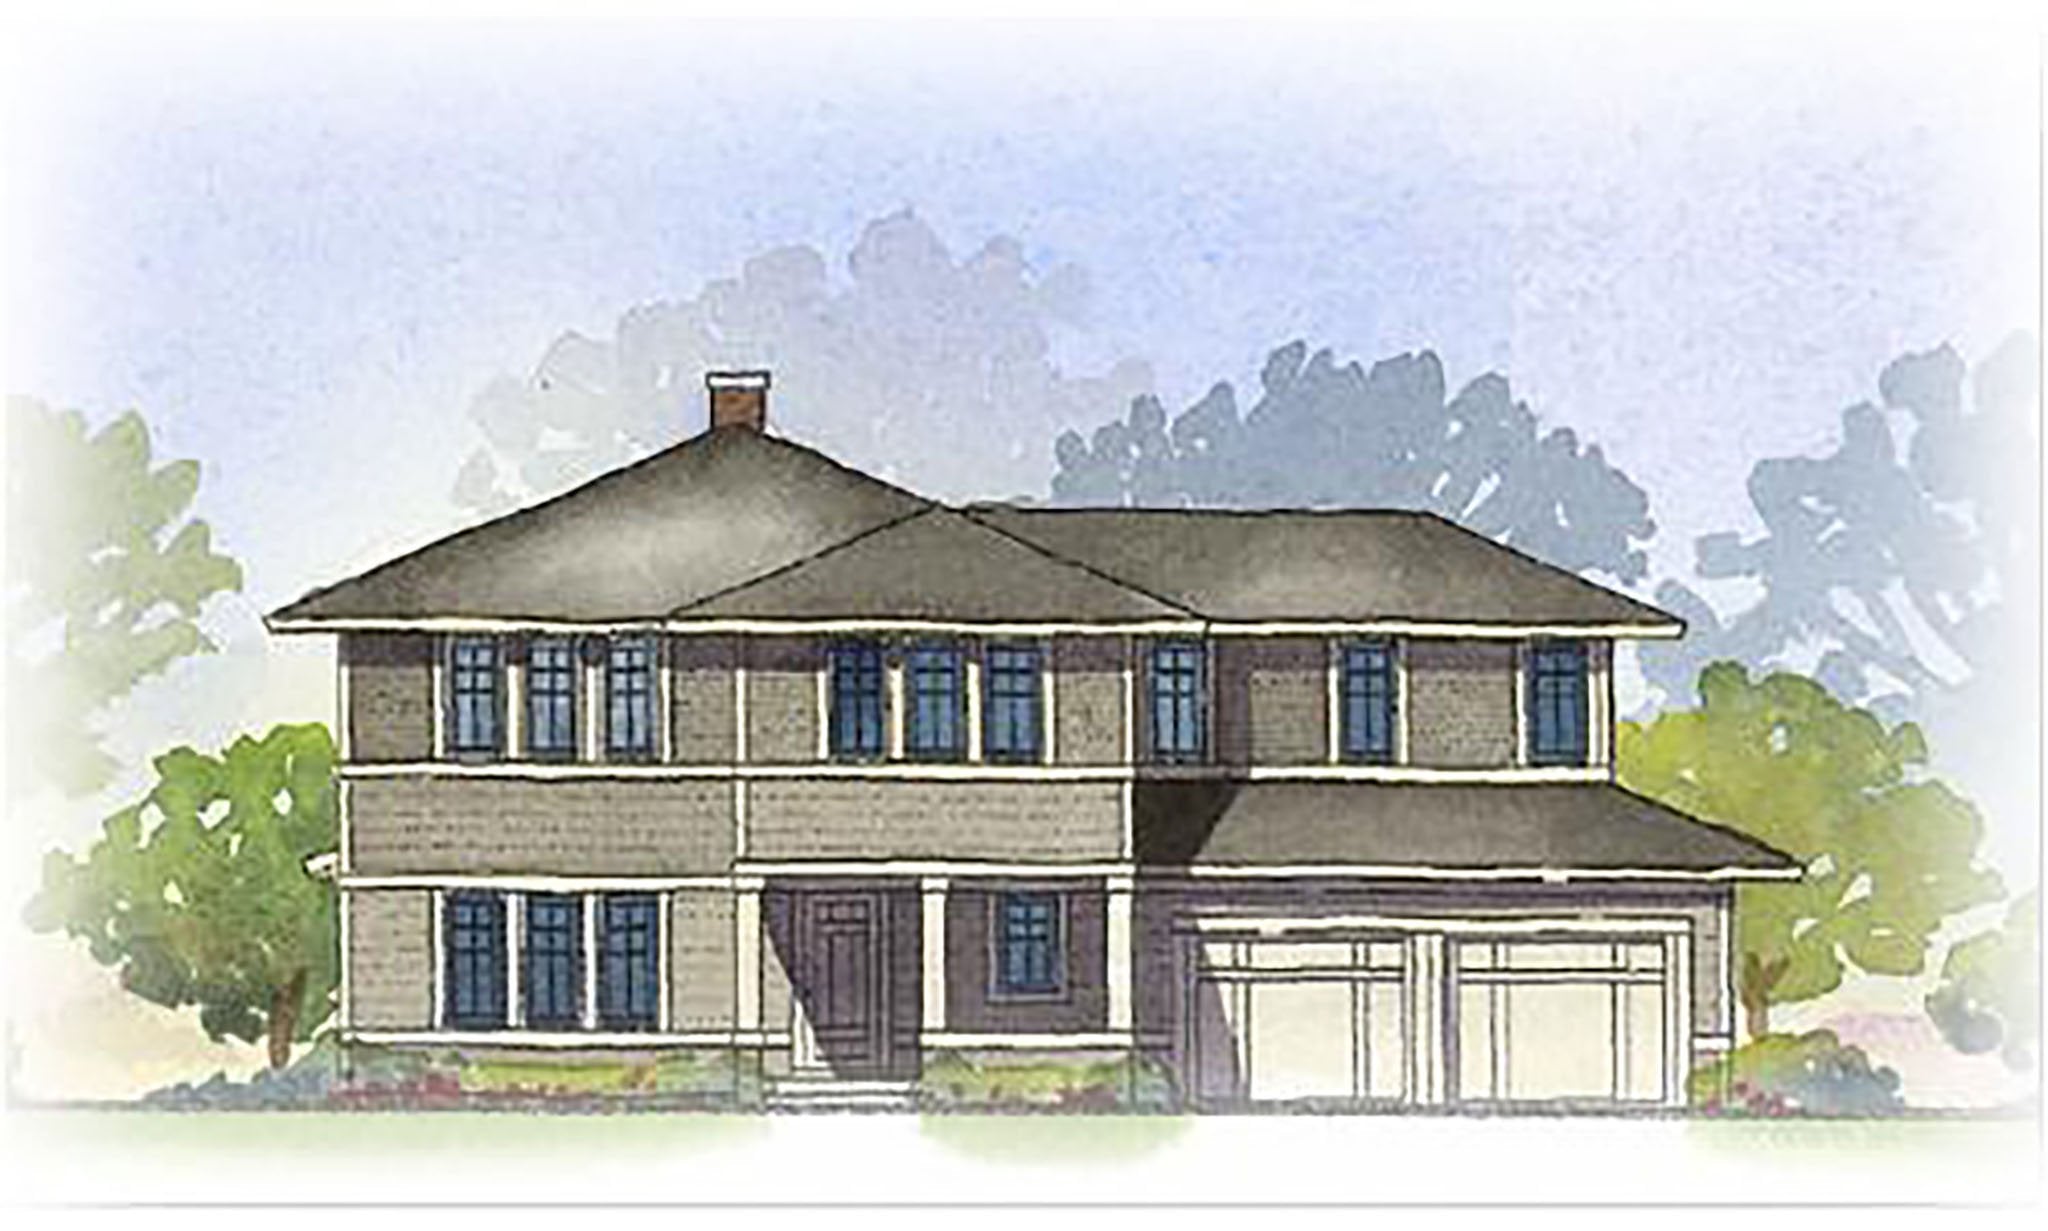 Prairie Style House Plans | Lake Drive Home Design | SketchPad House Plans